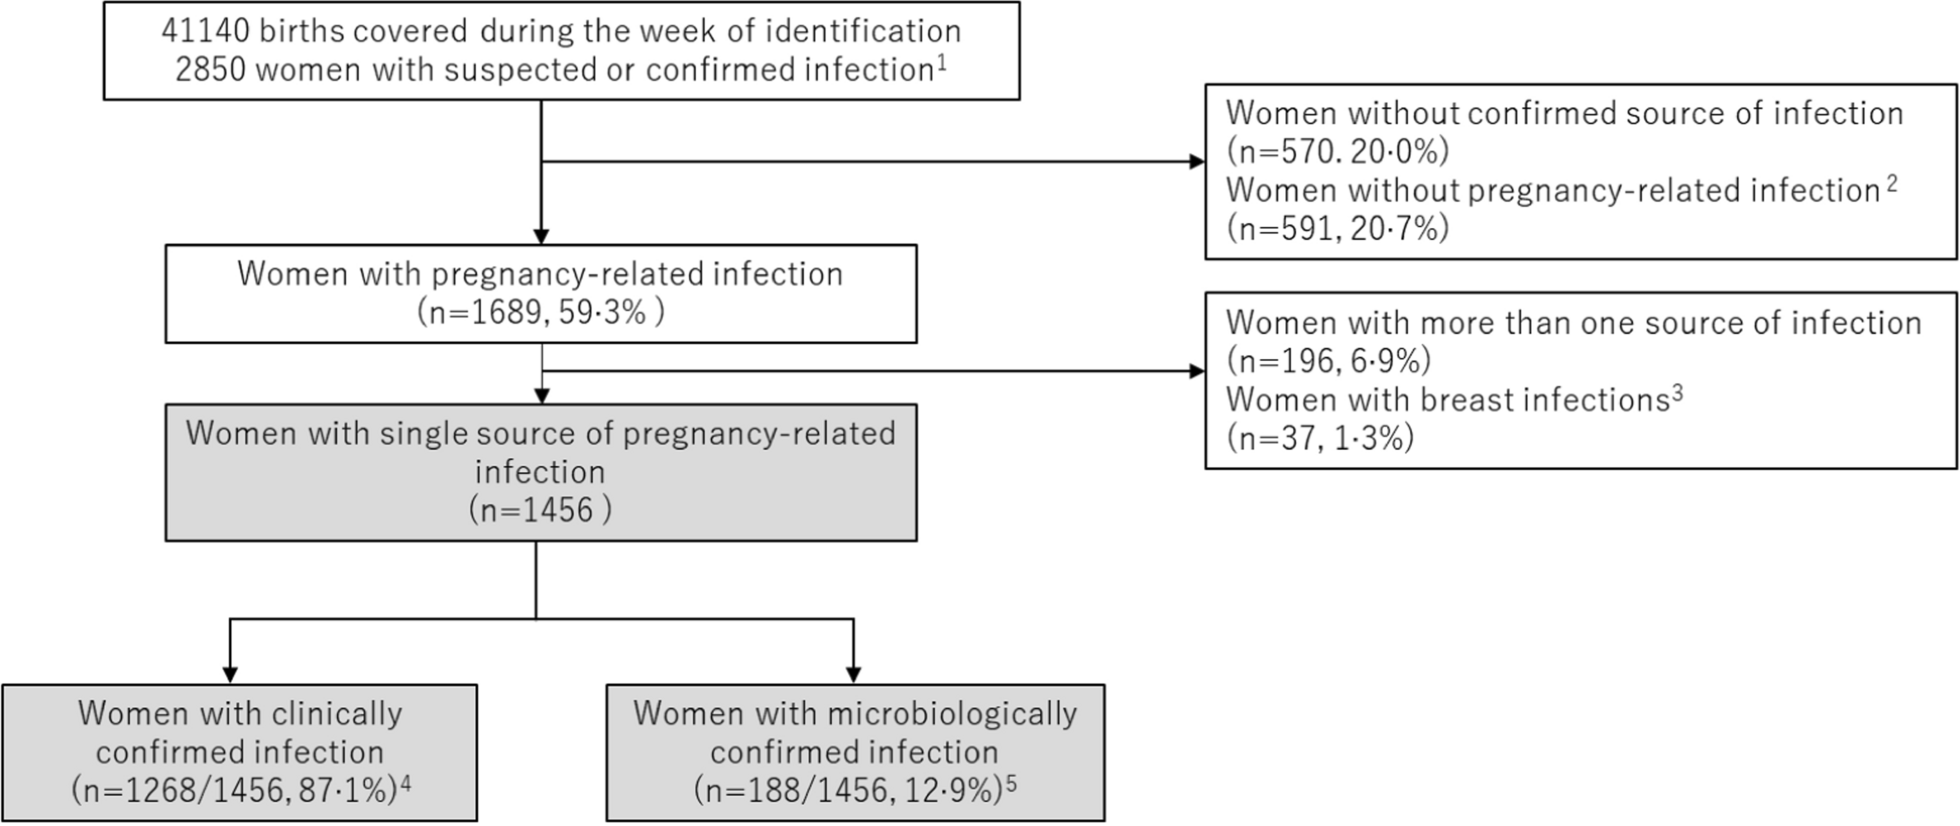 Aetiology and use of antibiotics in pregnancy-related infections: results of the WHO Global Maternal Sepsis Study (GLOSS), 1-week inception cohort